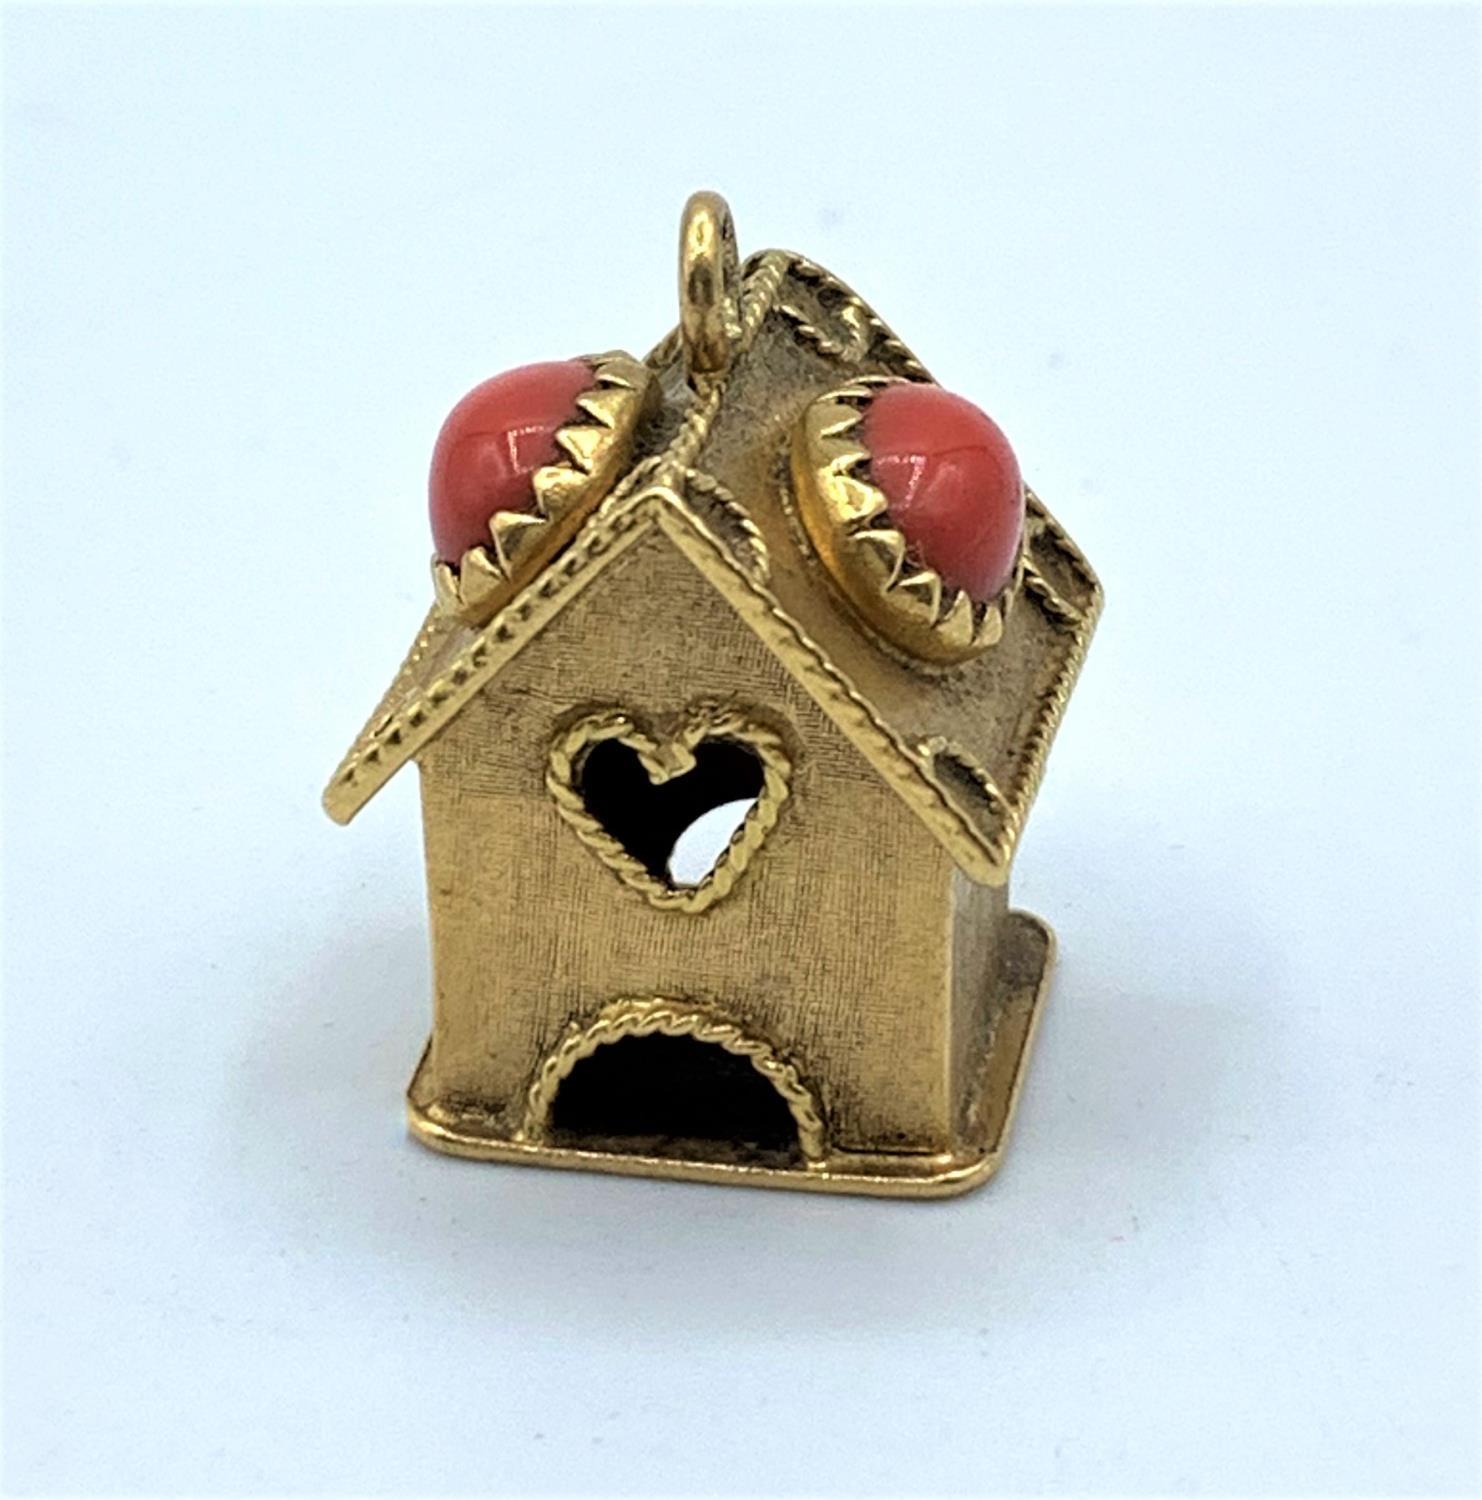 9ct Gold Vintage Birdbox Charm/Pendant with Red Stones, weight 7.8g and 2.5cm tall approx - Image 3 of 8